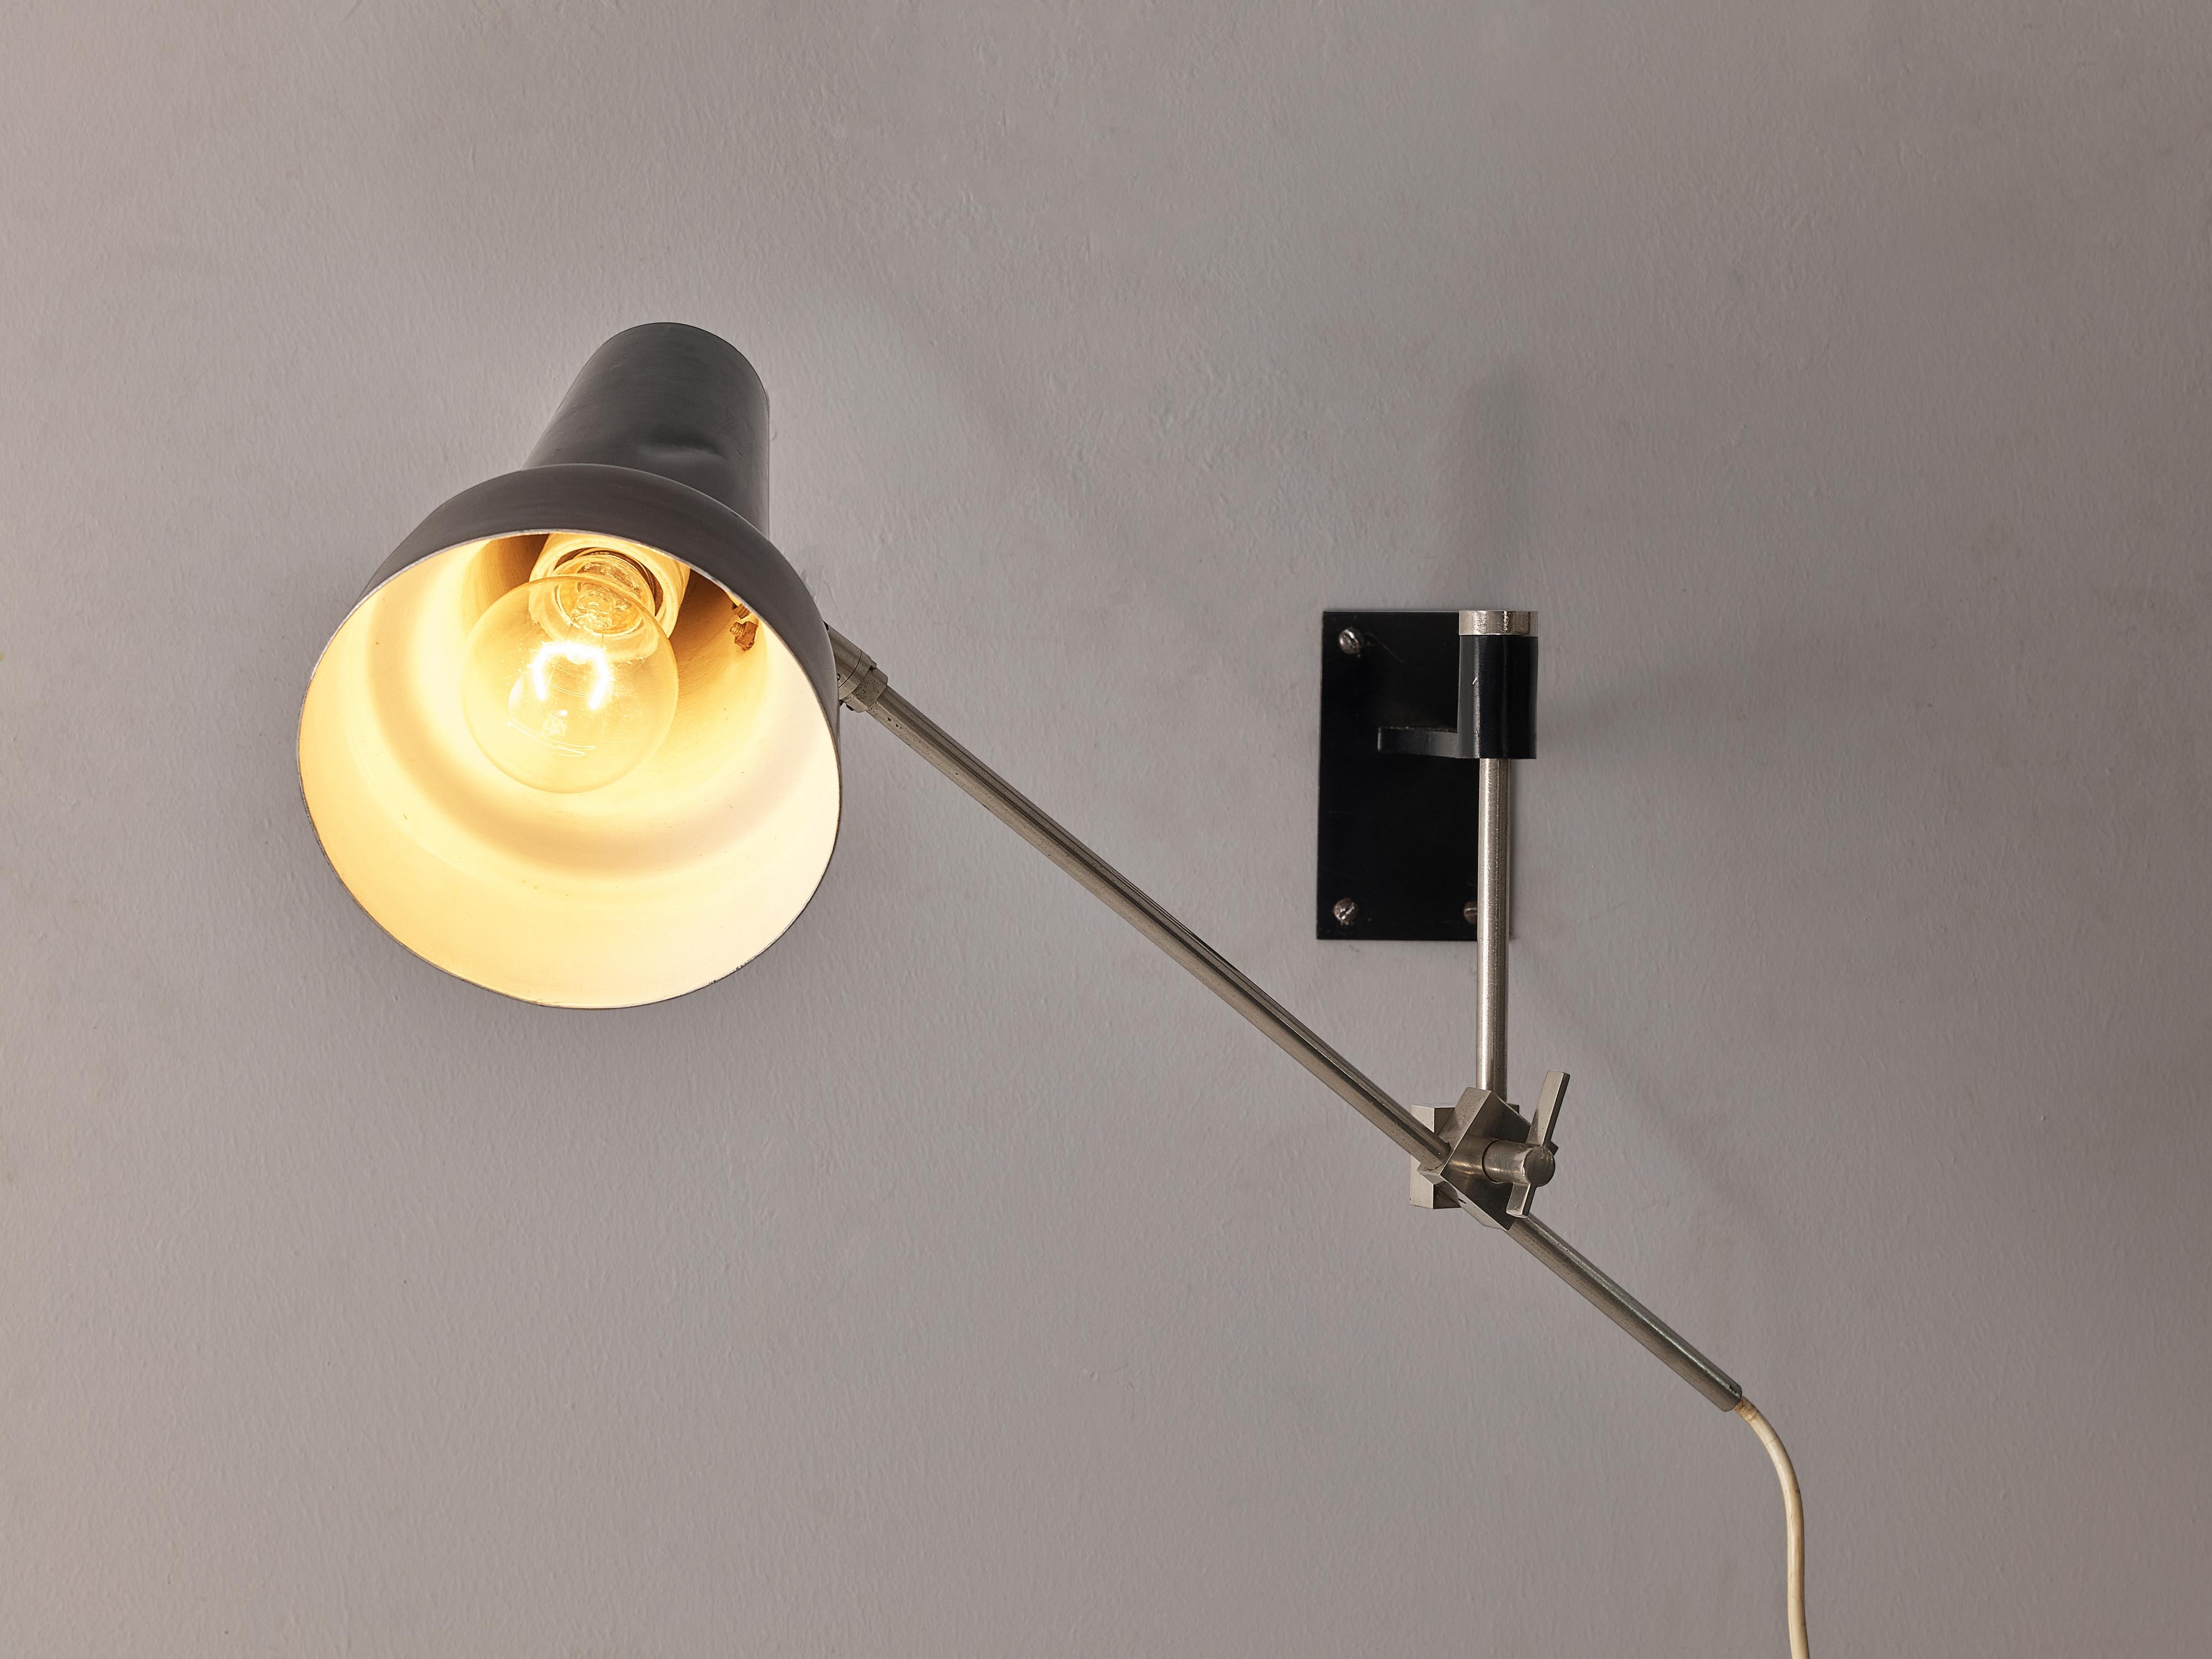 Wall lamp, aluminum, metal, Europe, 1960s

This pragmatic wall lamp can be attached on the wall. Both the stem and the cone shaped lamp shade that surrounds the lightbulb are adjustable, meaning that the light can be directed in any preferred